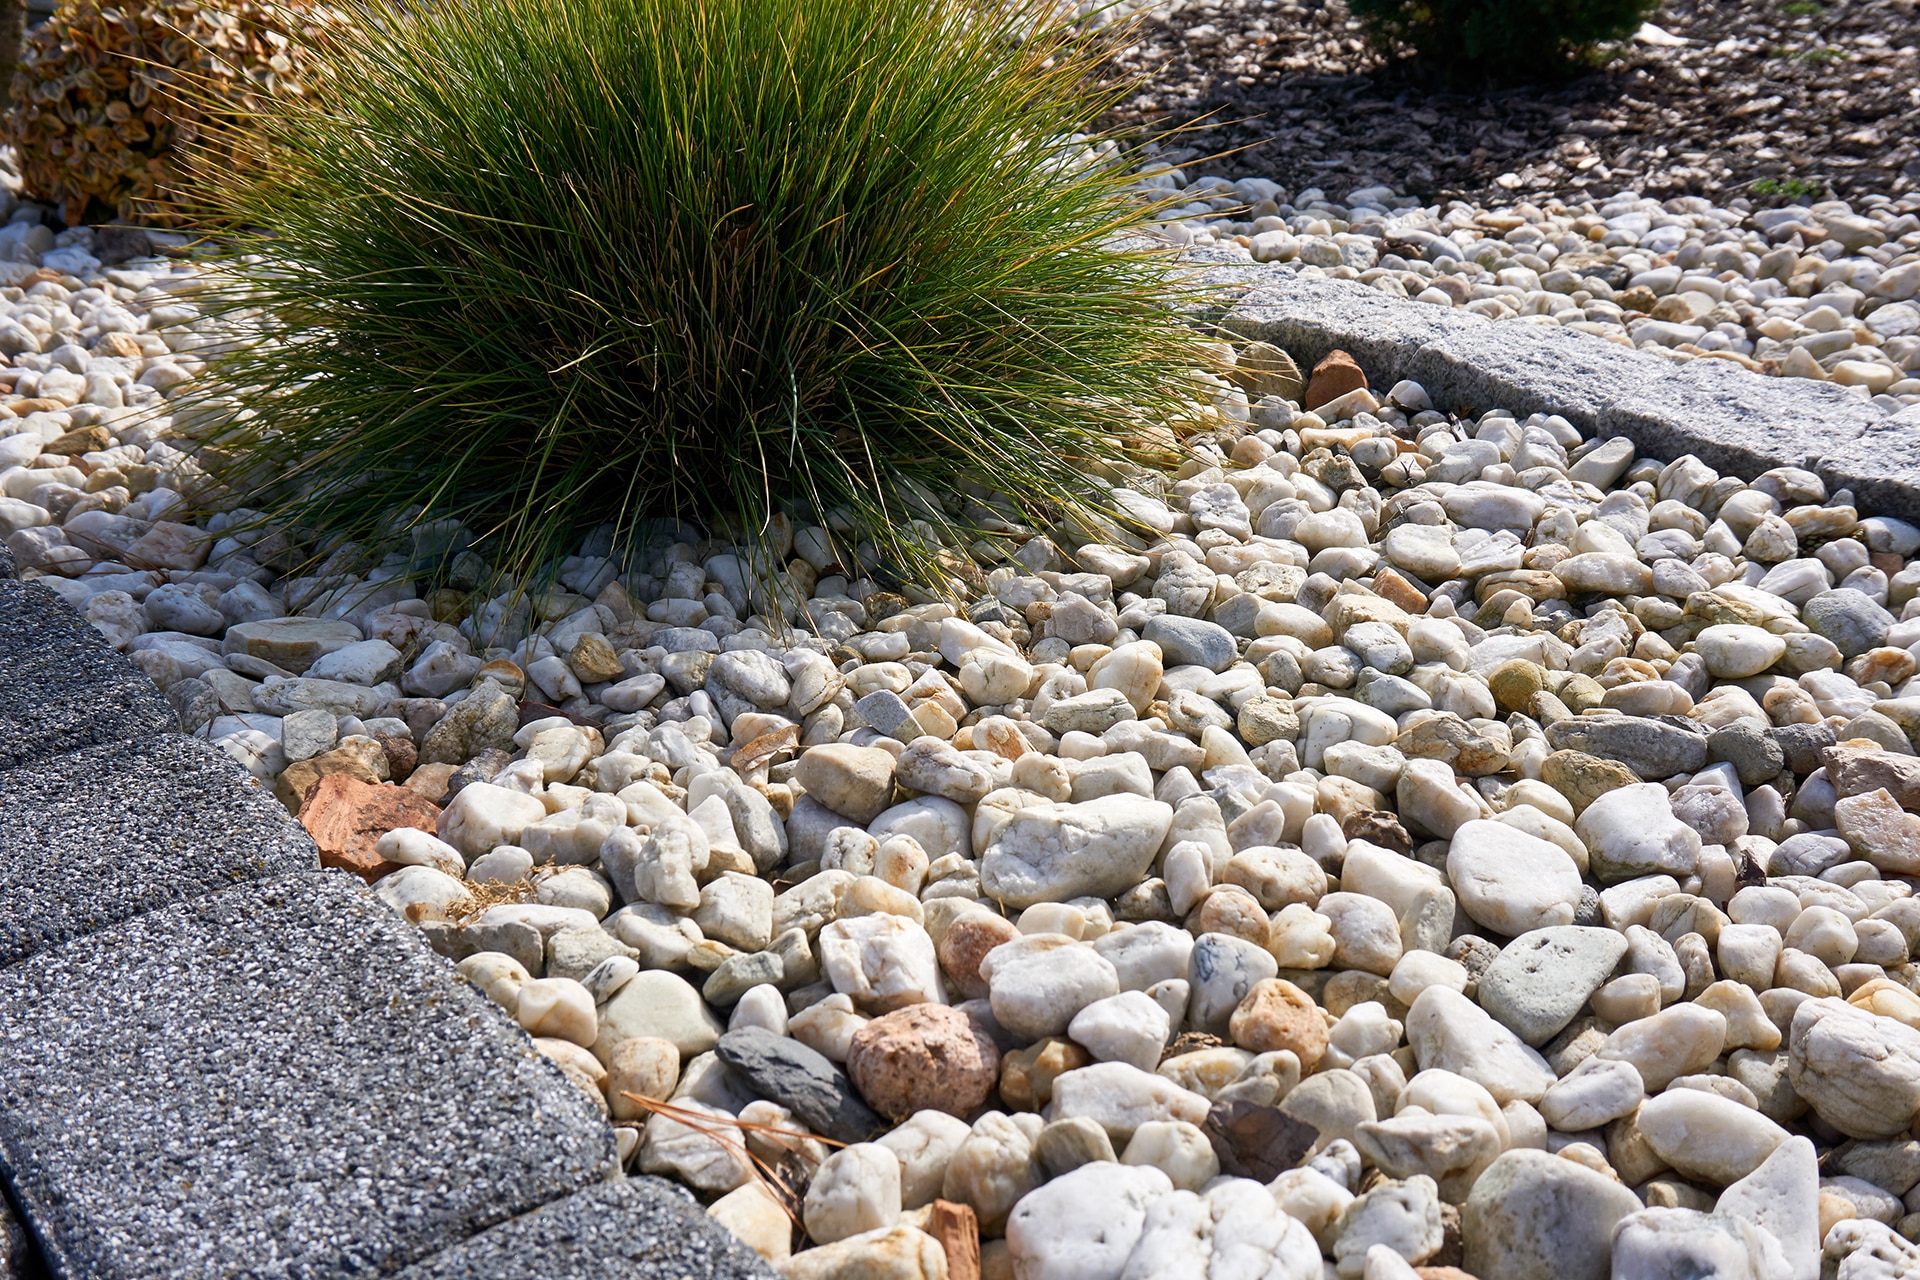 A single grass shrub casting a small shadow surrounded by pebble